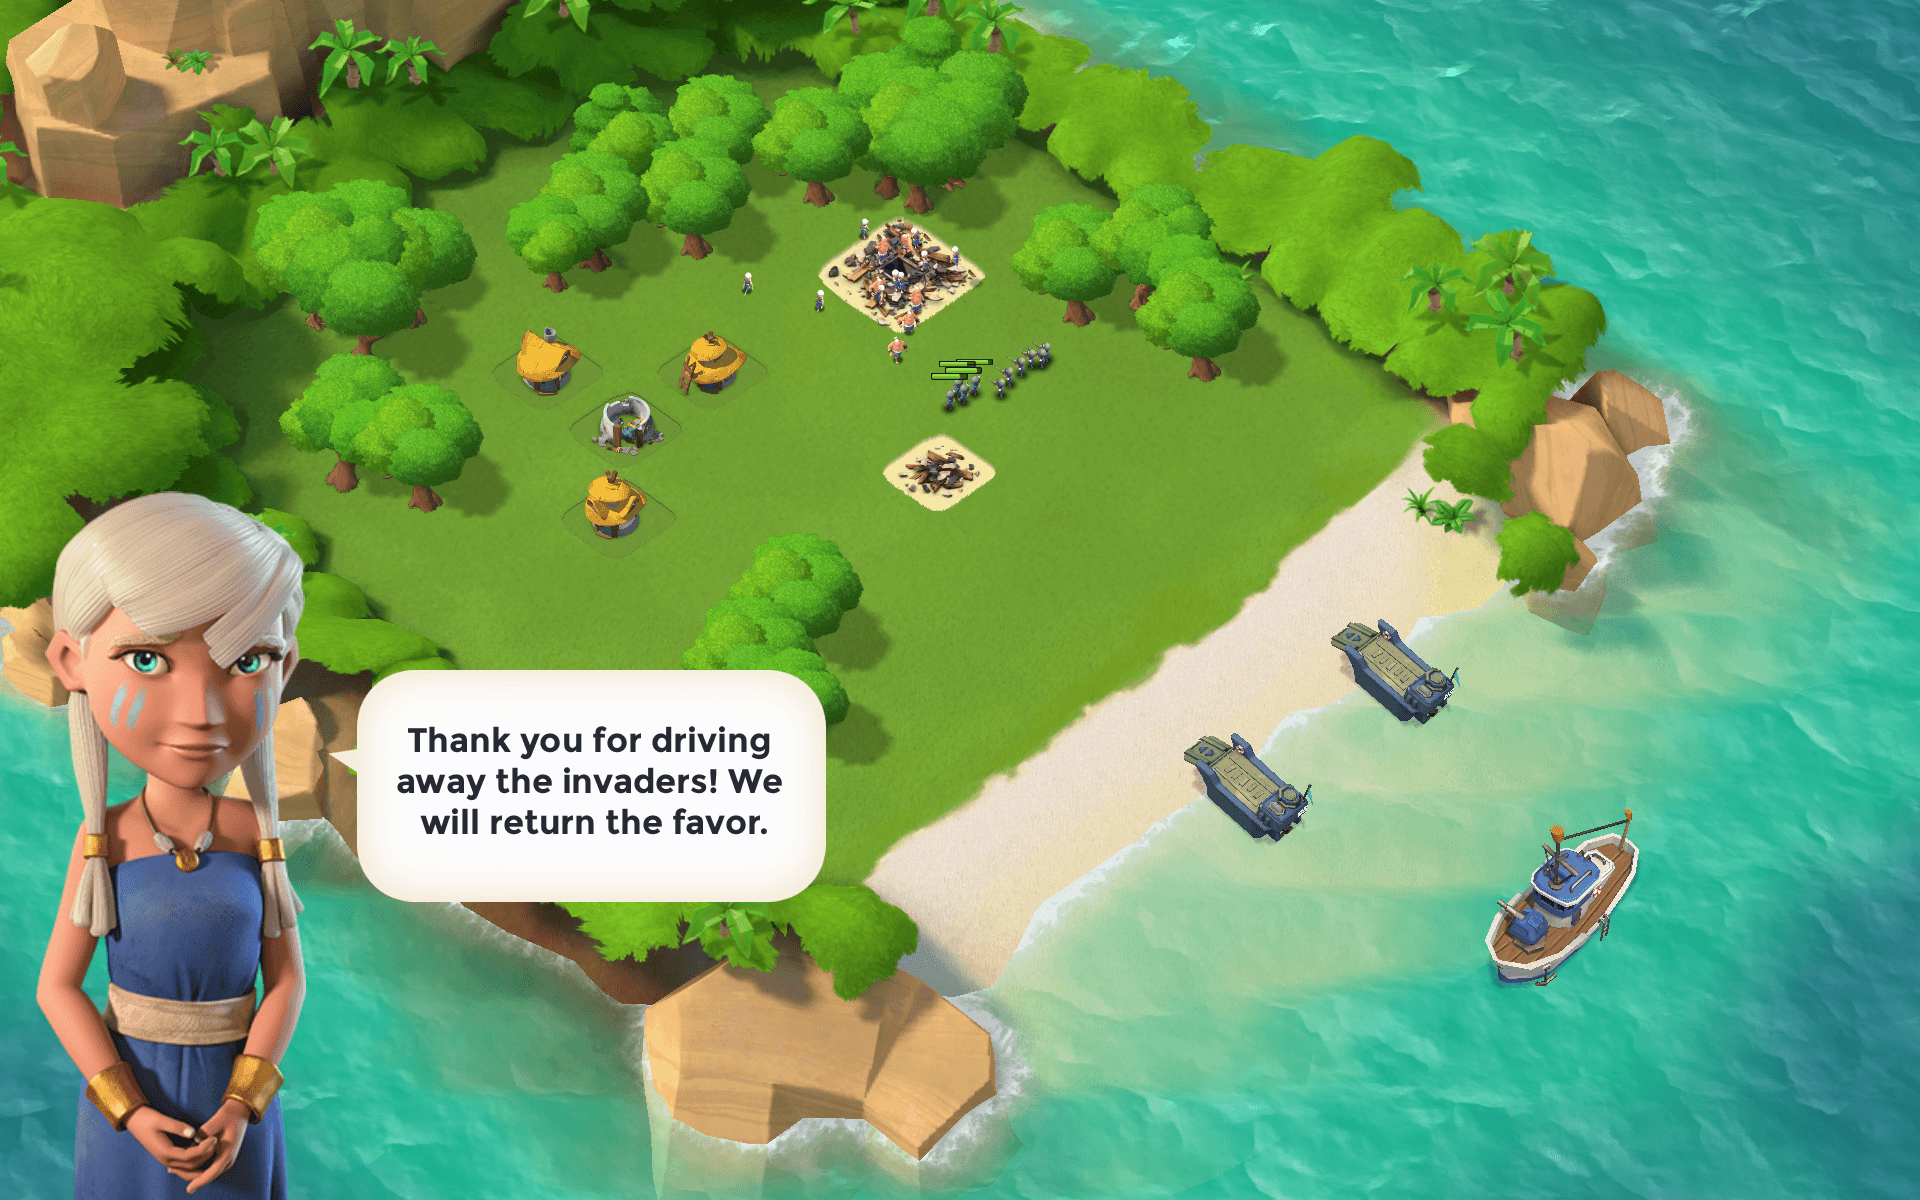 Supercell's Third Android Game Boom Beach Is Now Available